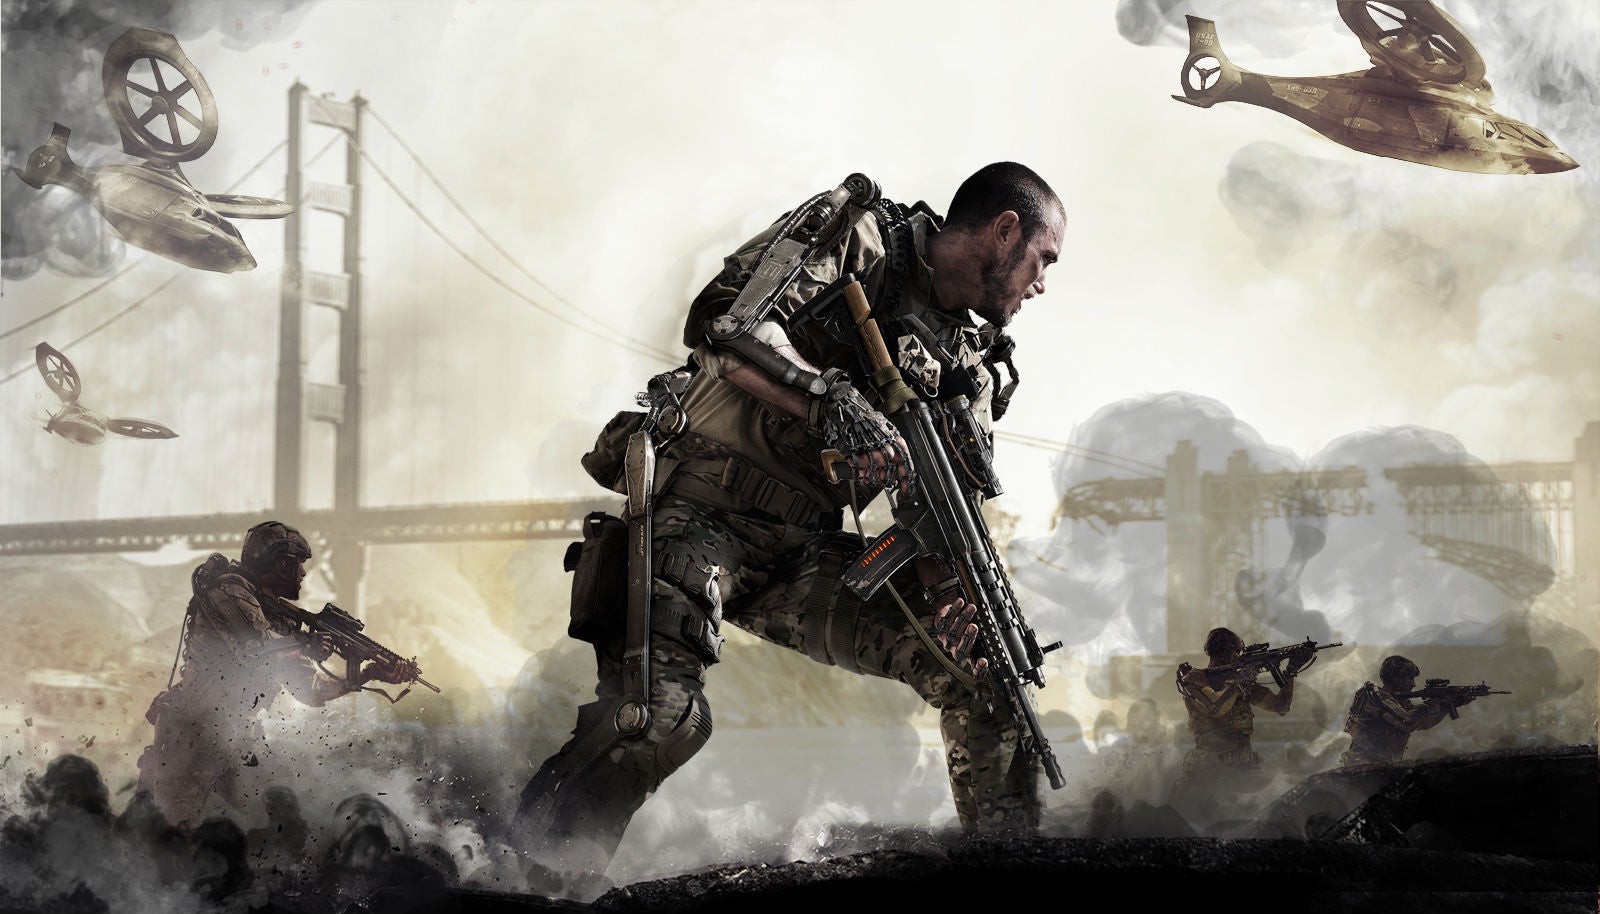 Activision teams up with developer ELEX for unannounced Call of Duty mobile game